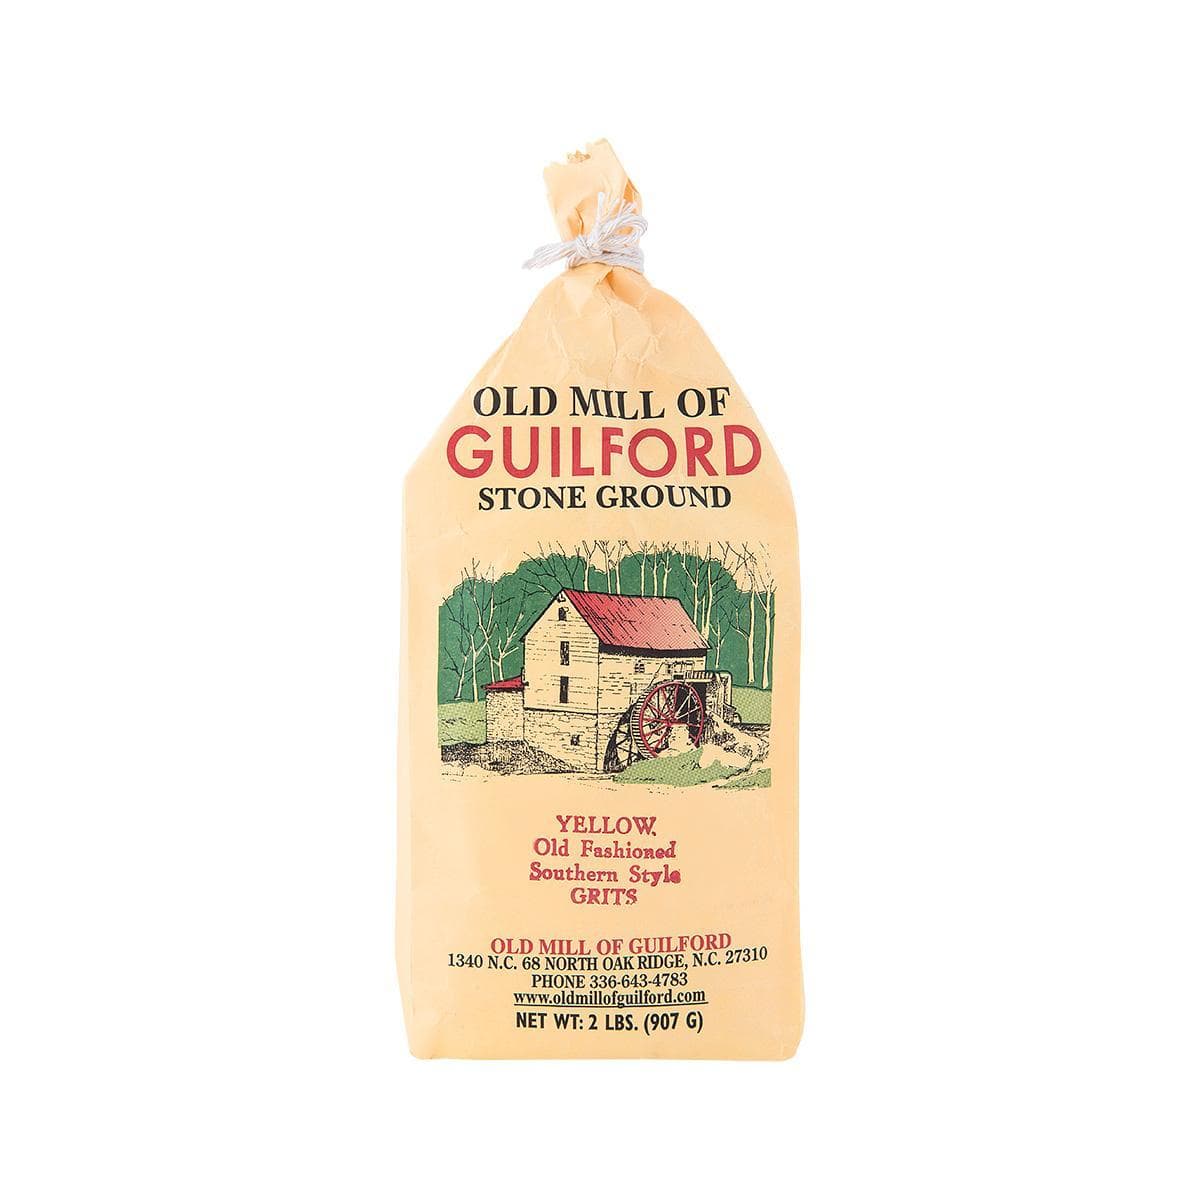 Old Mill of Guilford Old Mill of Guilford Old Fashioned Southern Style Yellow Grits 2 lb